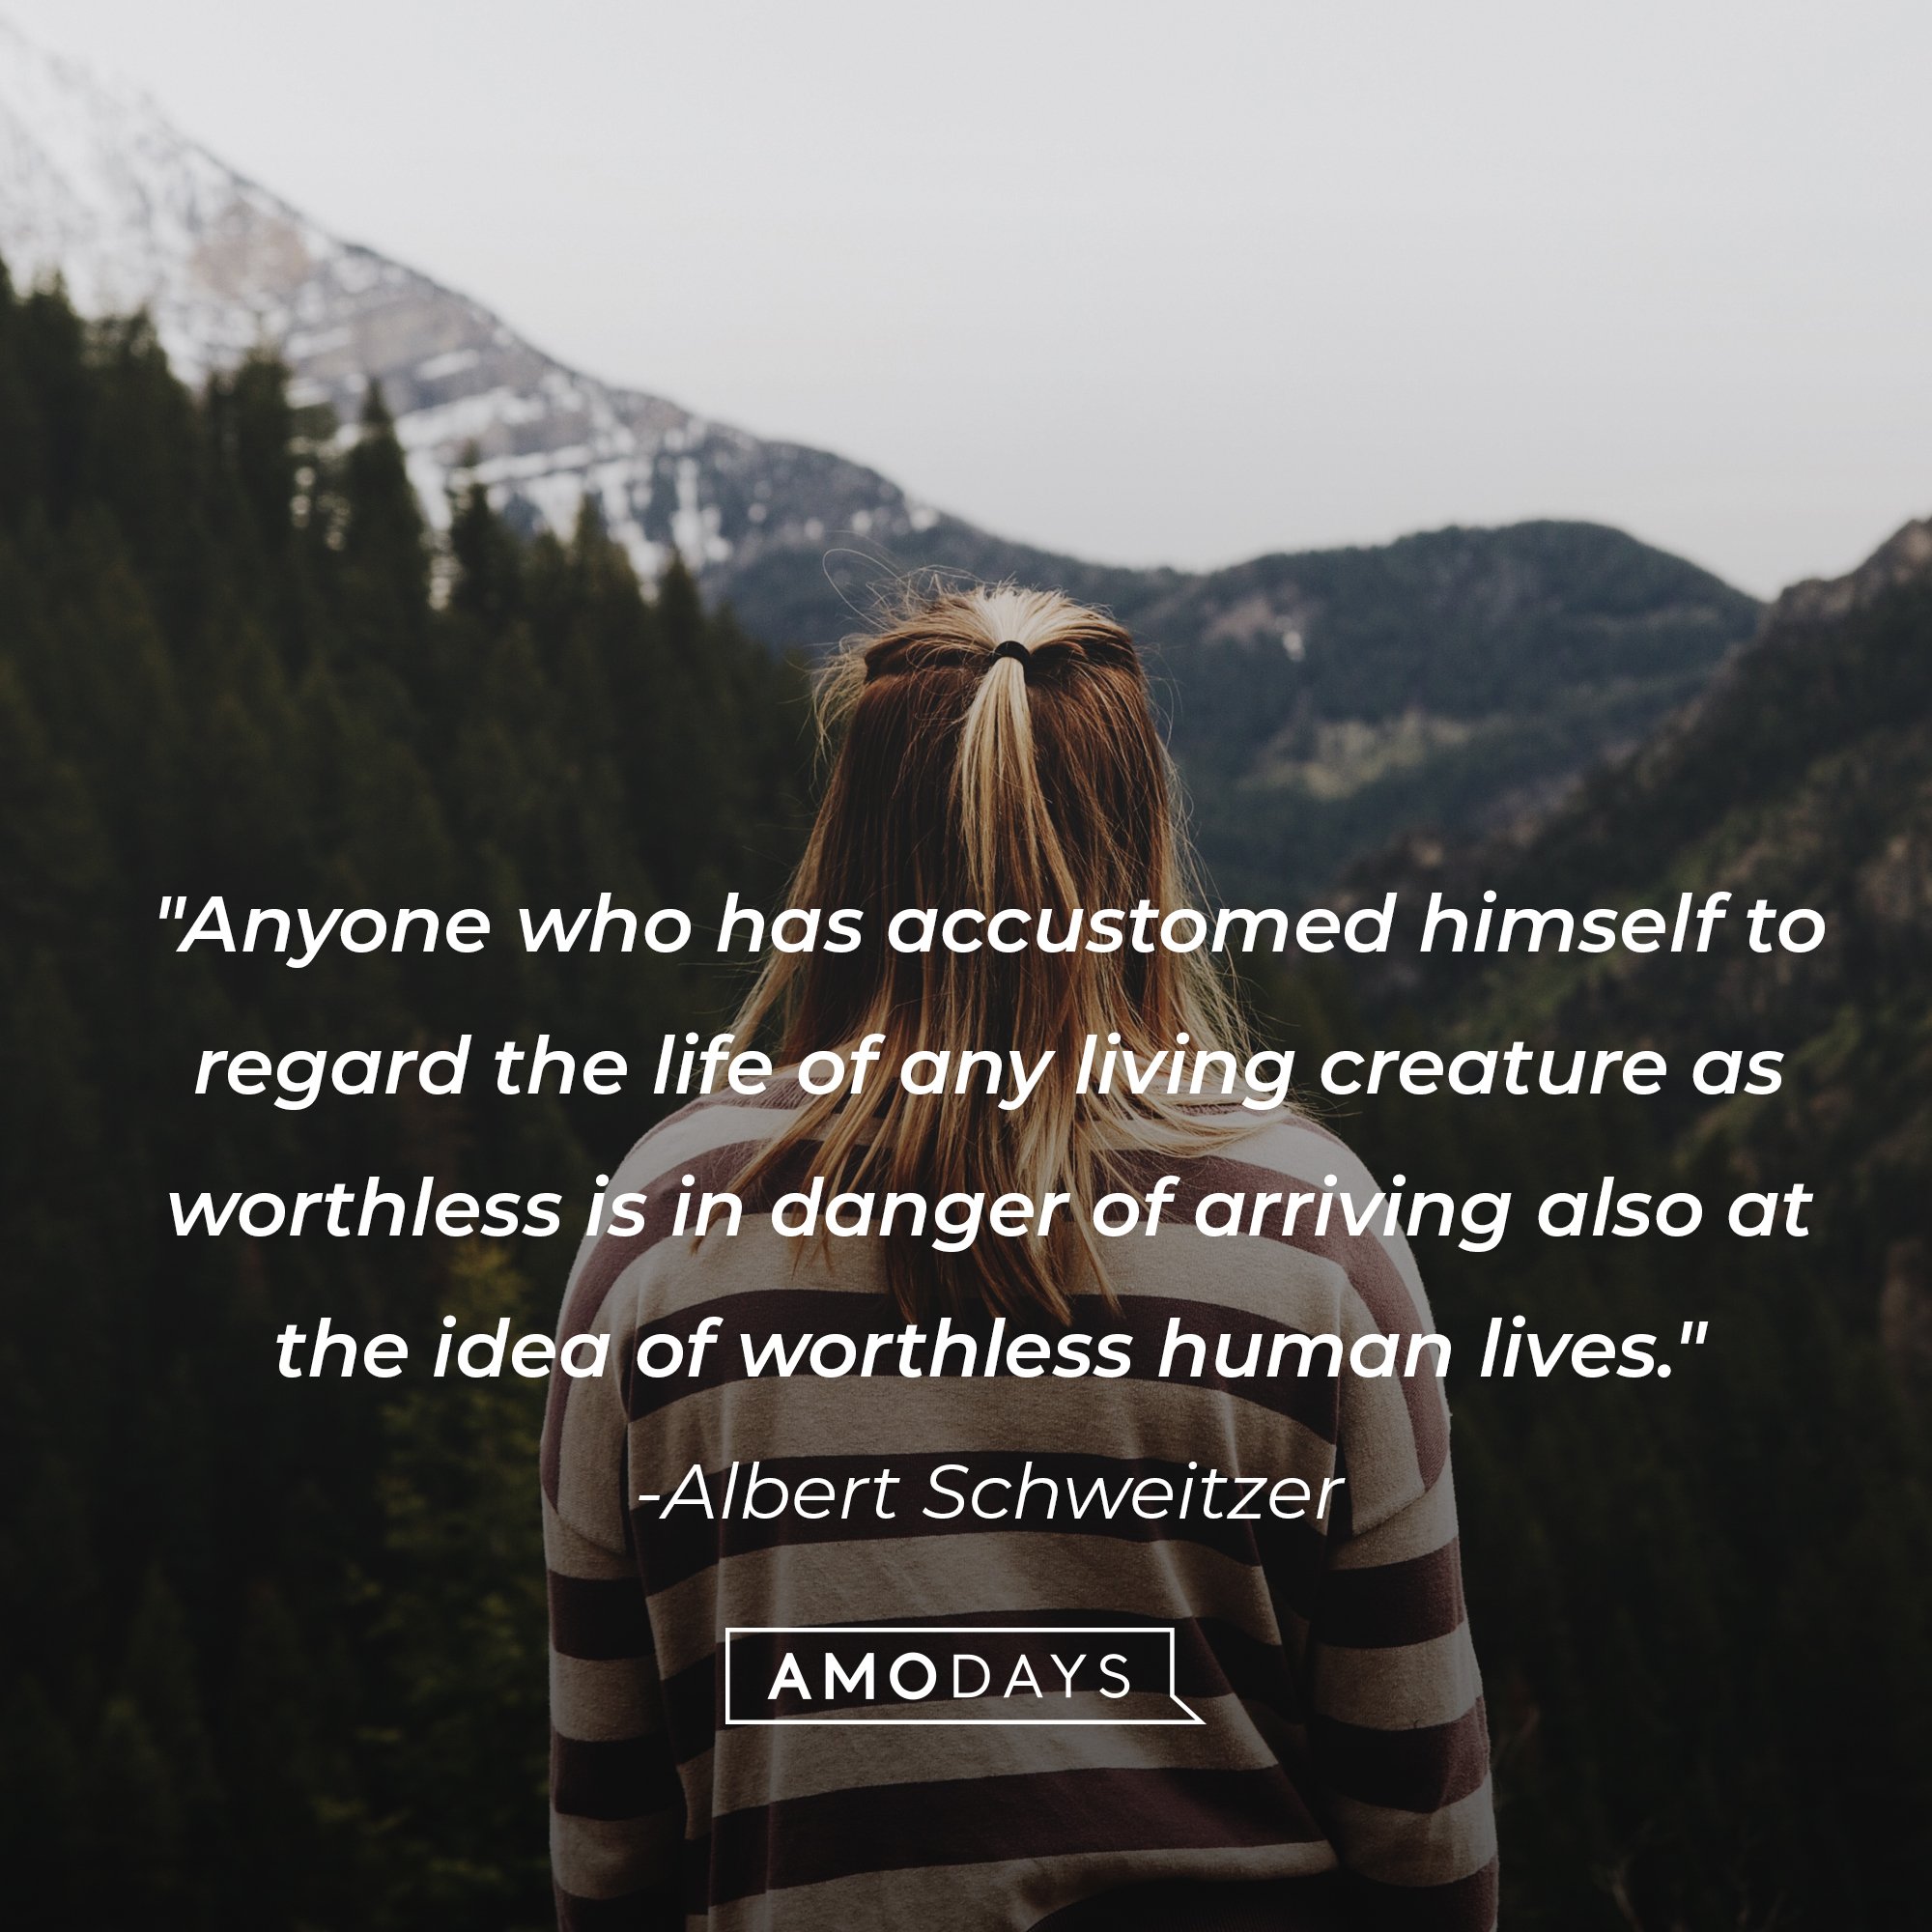 Albert Schweitzer's quote: "Anyone who has accustomed himself to regard the life of any living creature as worthless is in danger of arriving also at the idea of worthless human lives." | Image: AmoDays